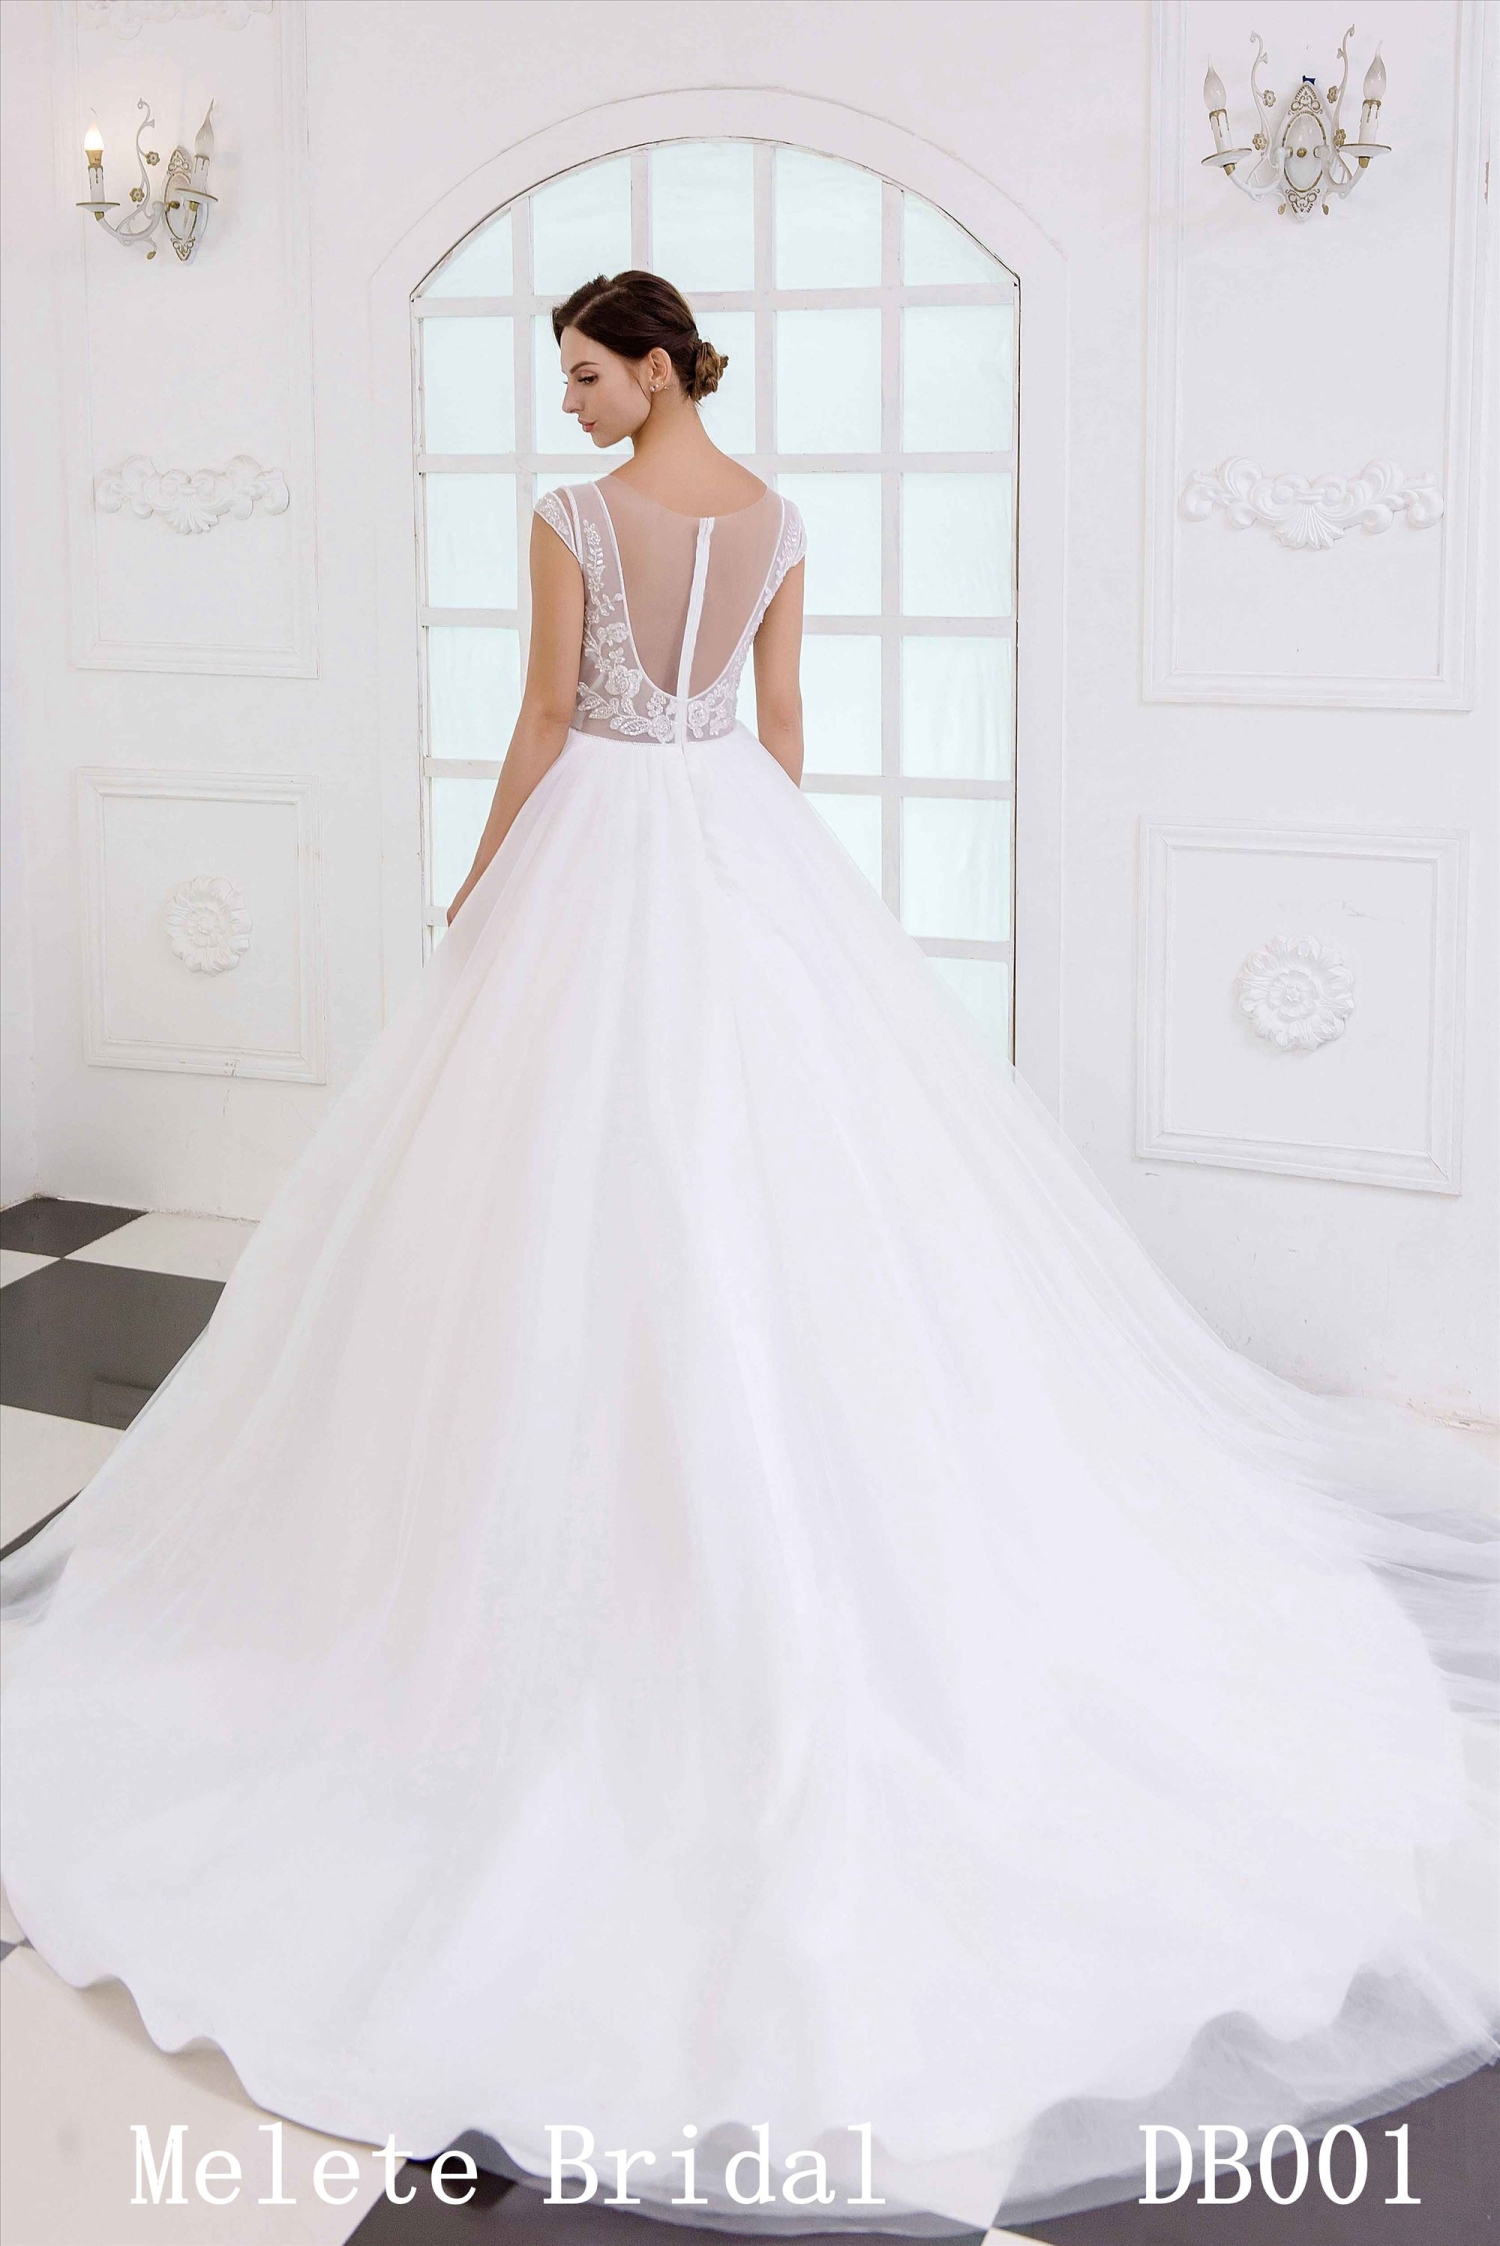 the wedding gown